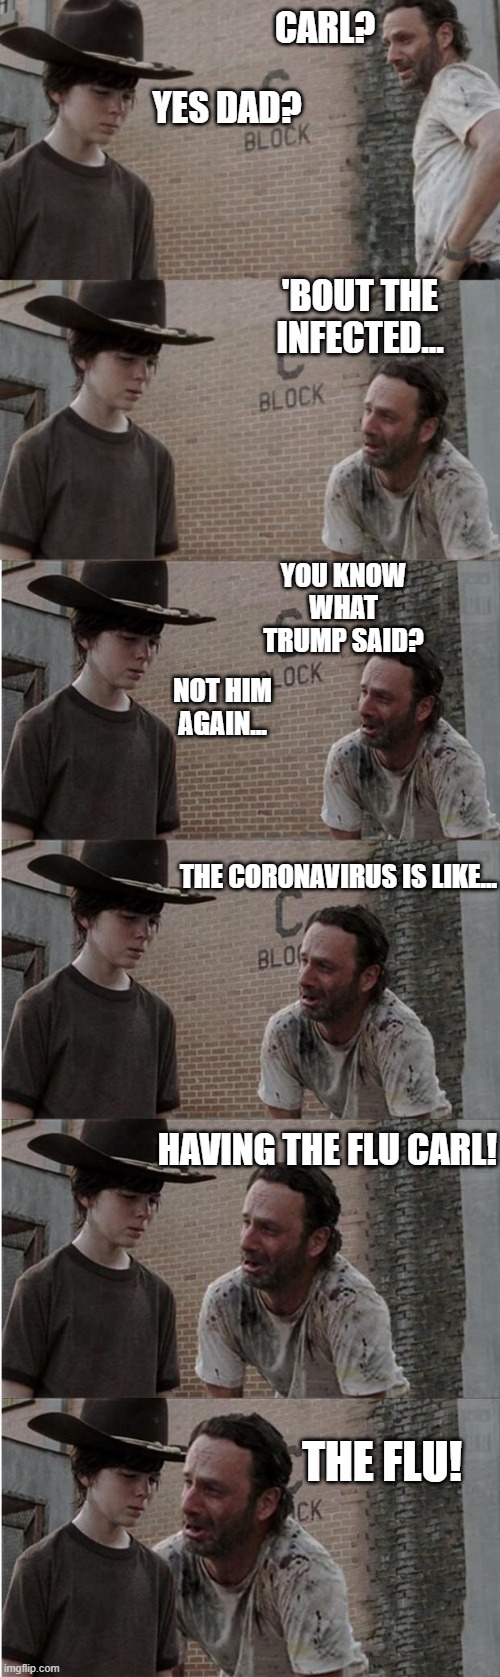 Rick and Carl Longer | CARL? YES DAD? 'BOUT THE INFECTED... YOU KNOW WHAT TRUMP SAID? NOT HIM AGAIN... THE CORONAVIRUS IS LIKE... HAVING THE FLU CARL! THE FLU! | image tagged in memes,rick and carl longer | made w/ Imgflip meme maker